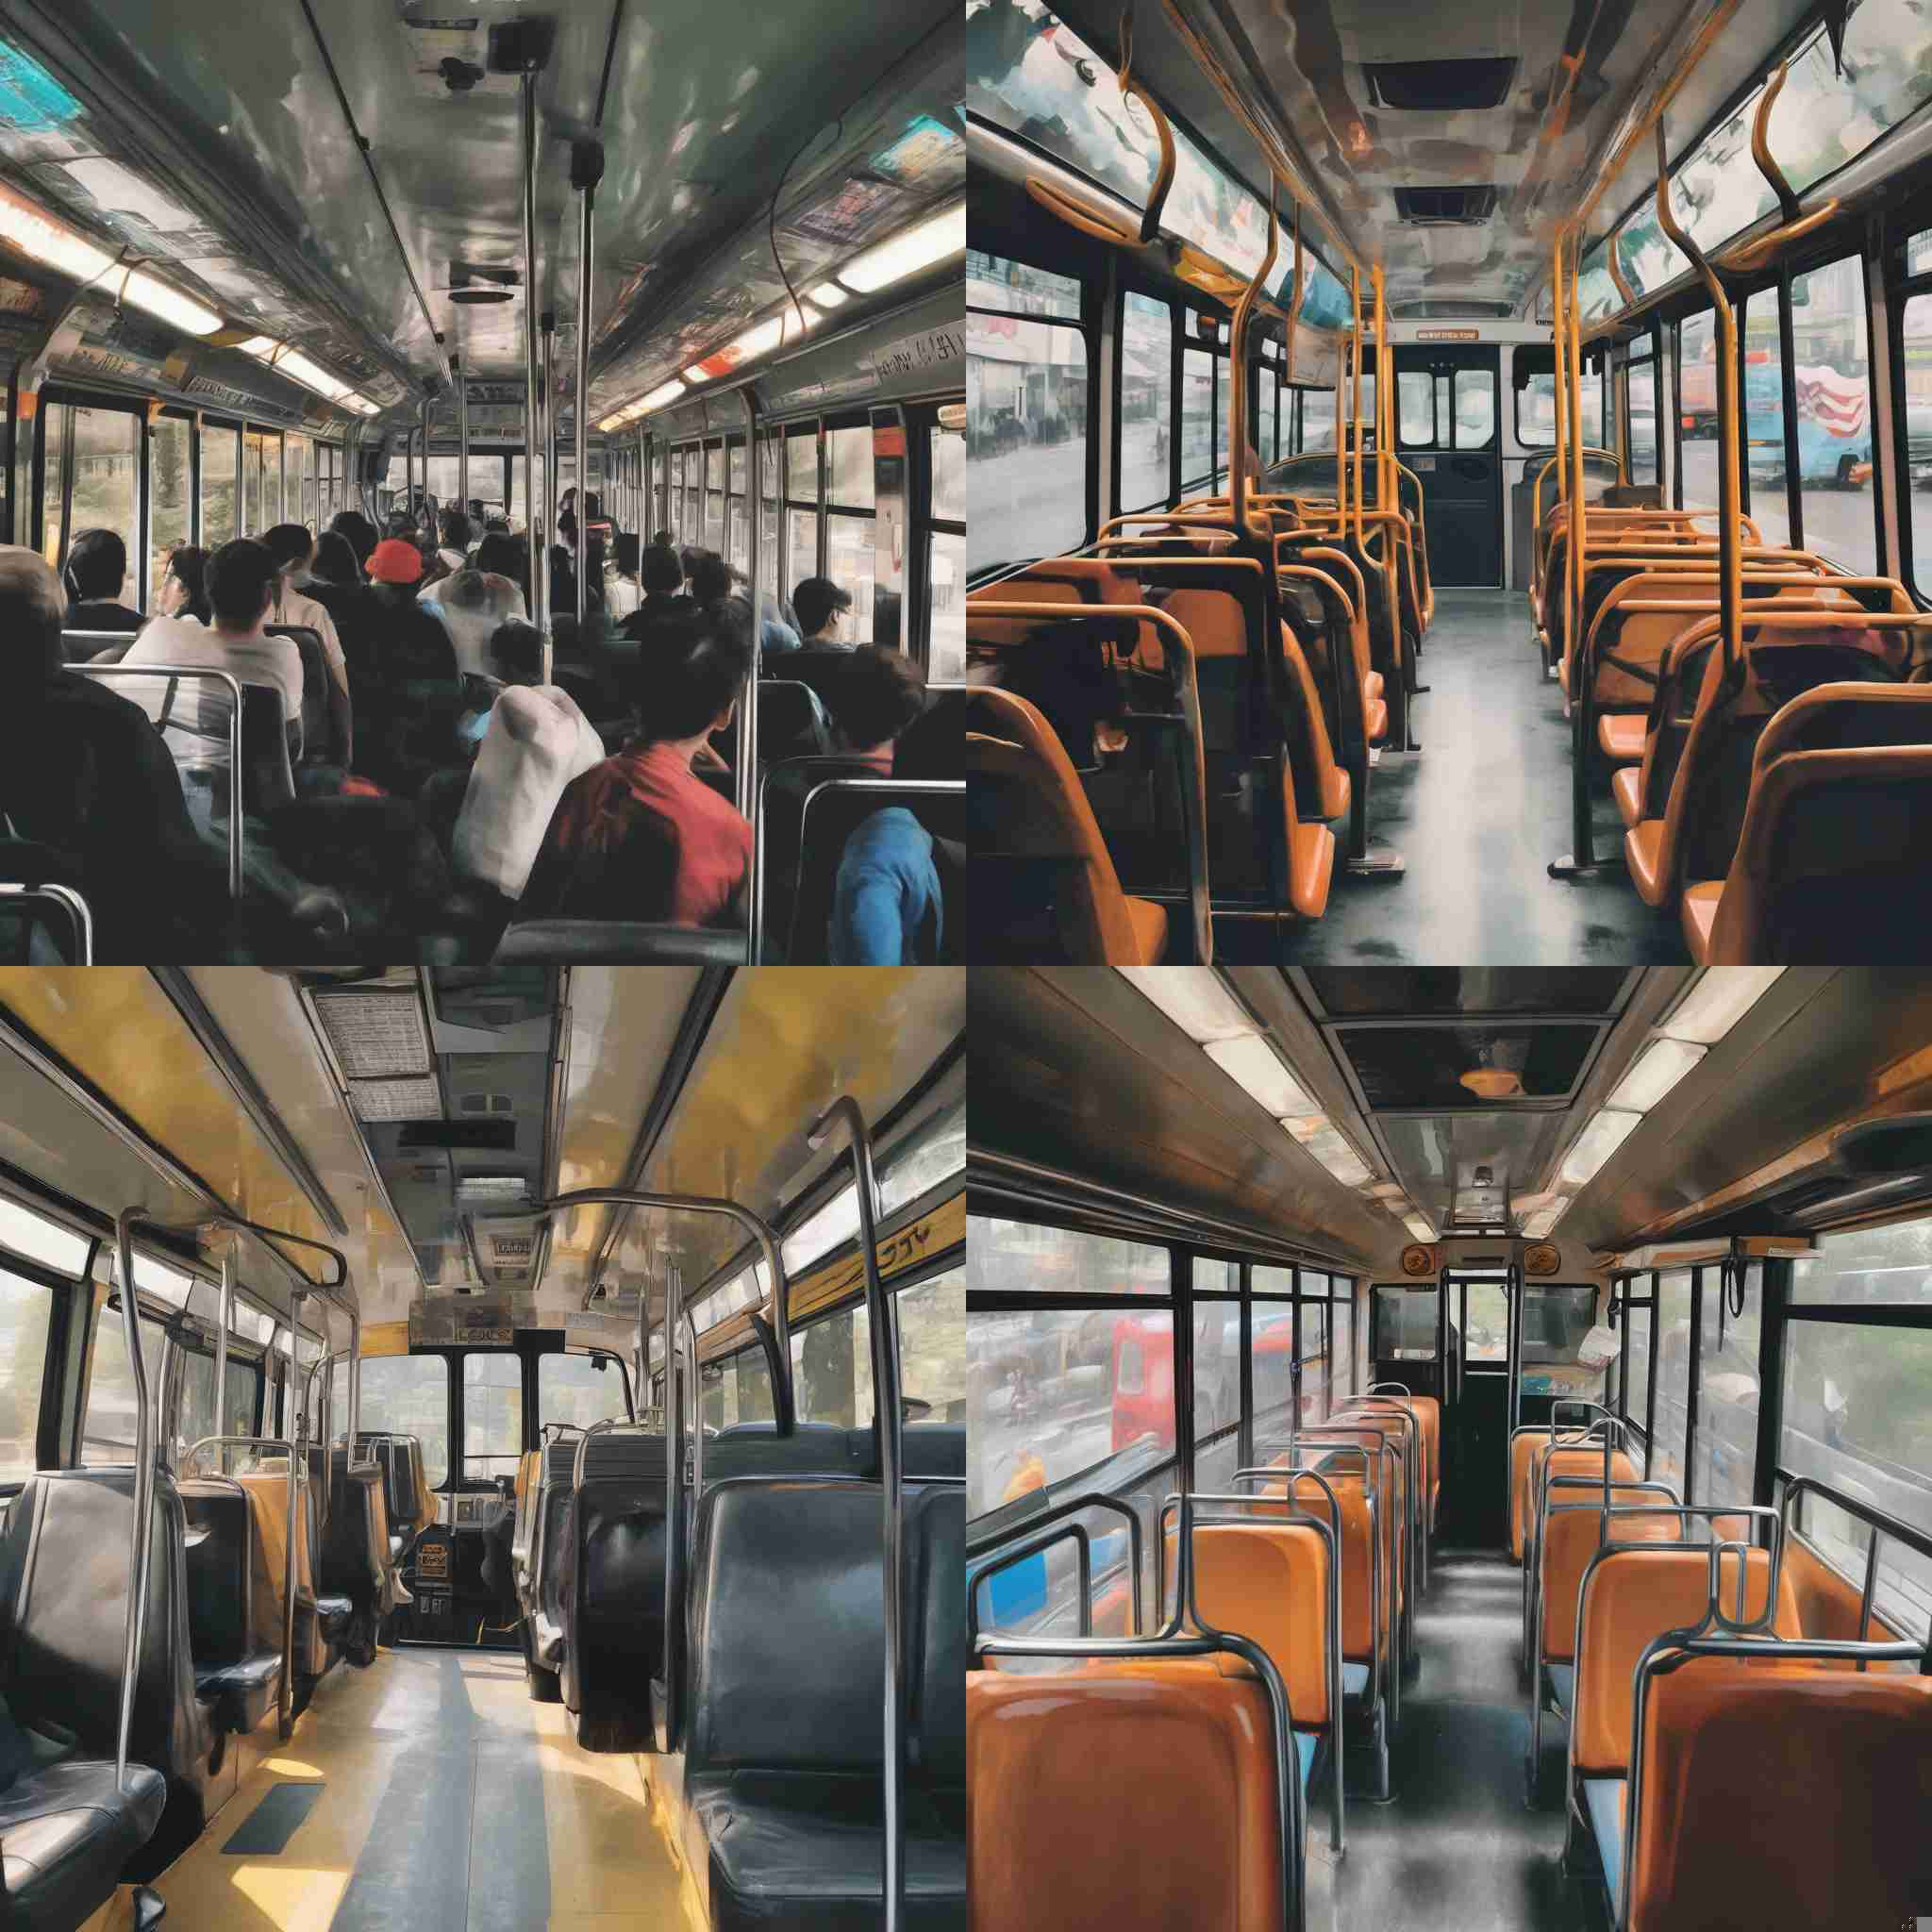 The inside of a bus during peak hours